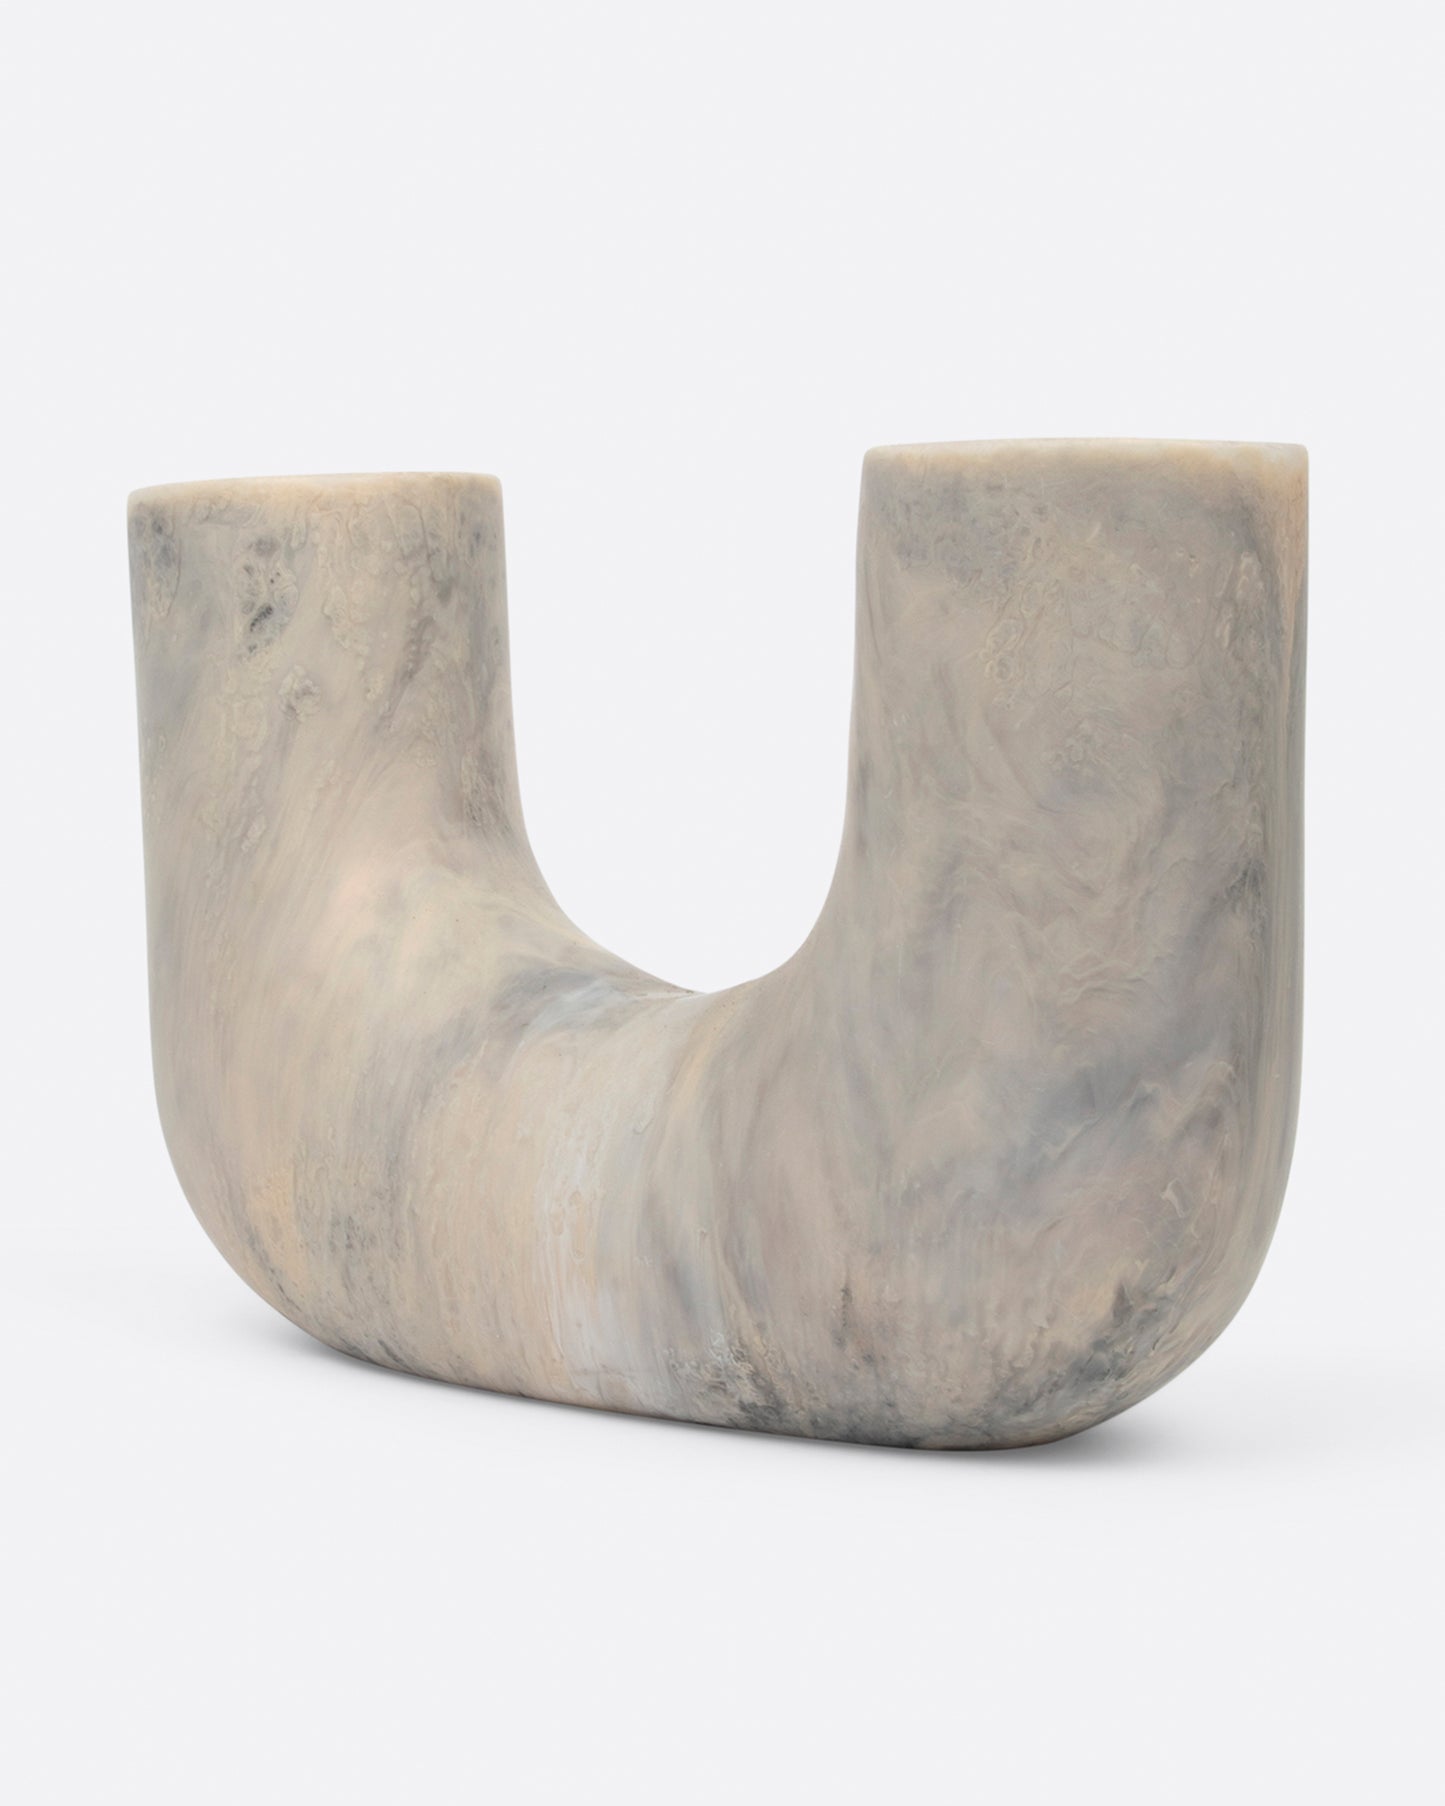 A swirled gray resin U-shaped vase with an opening on either side, shown from the side.